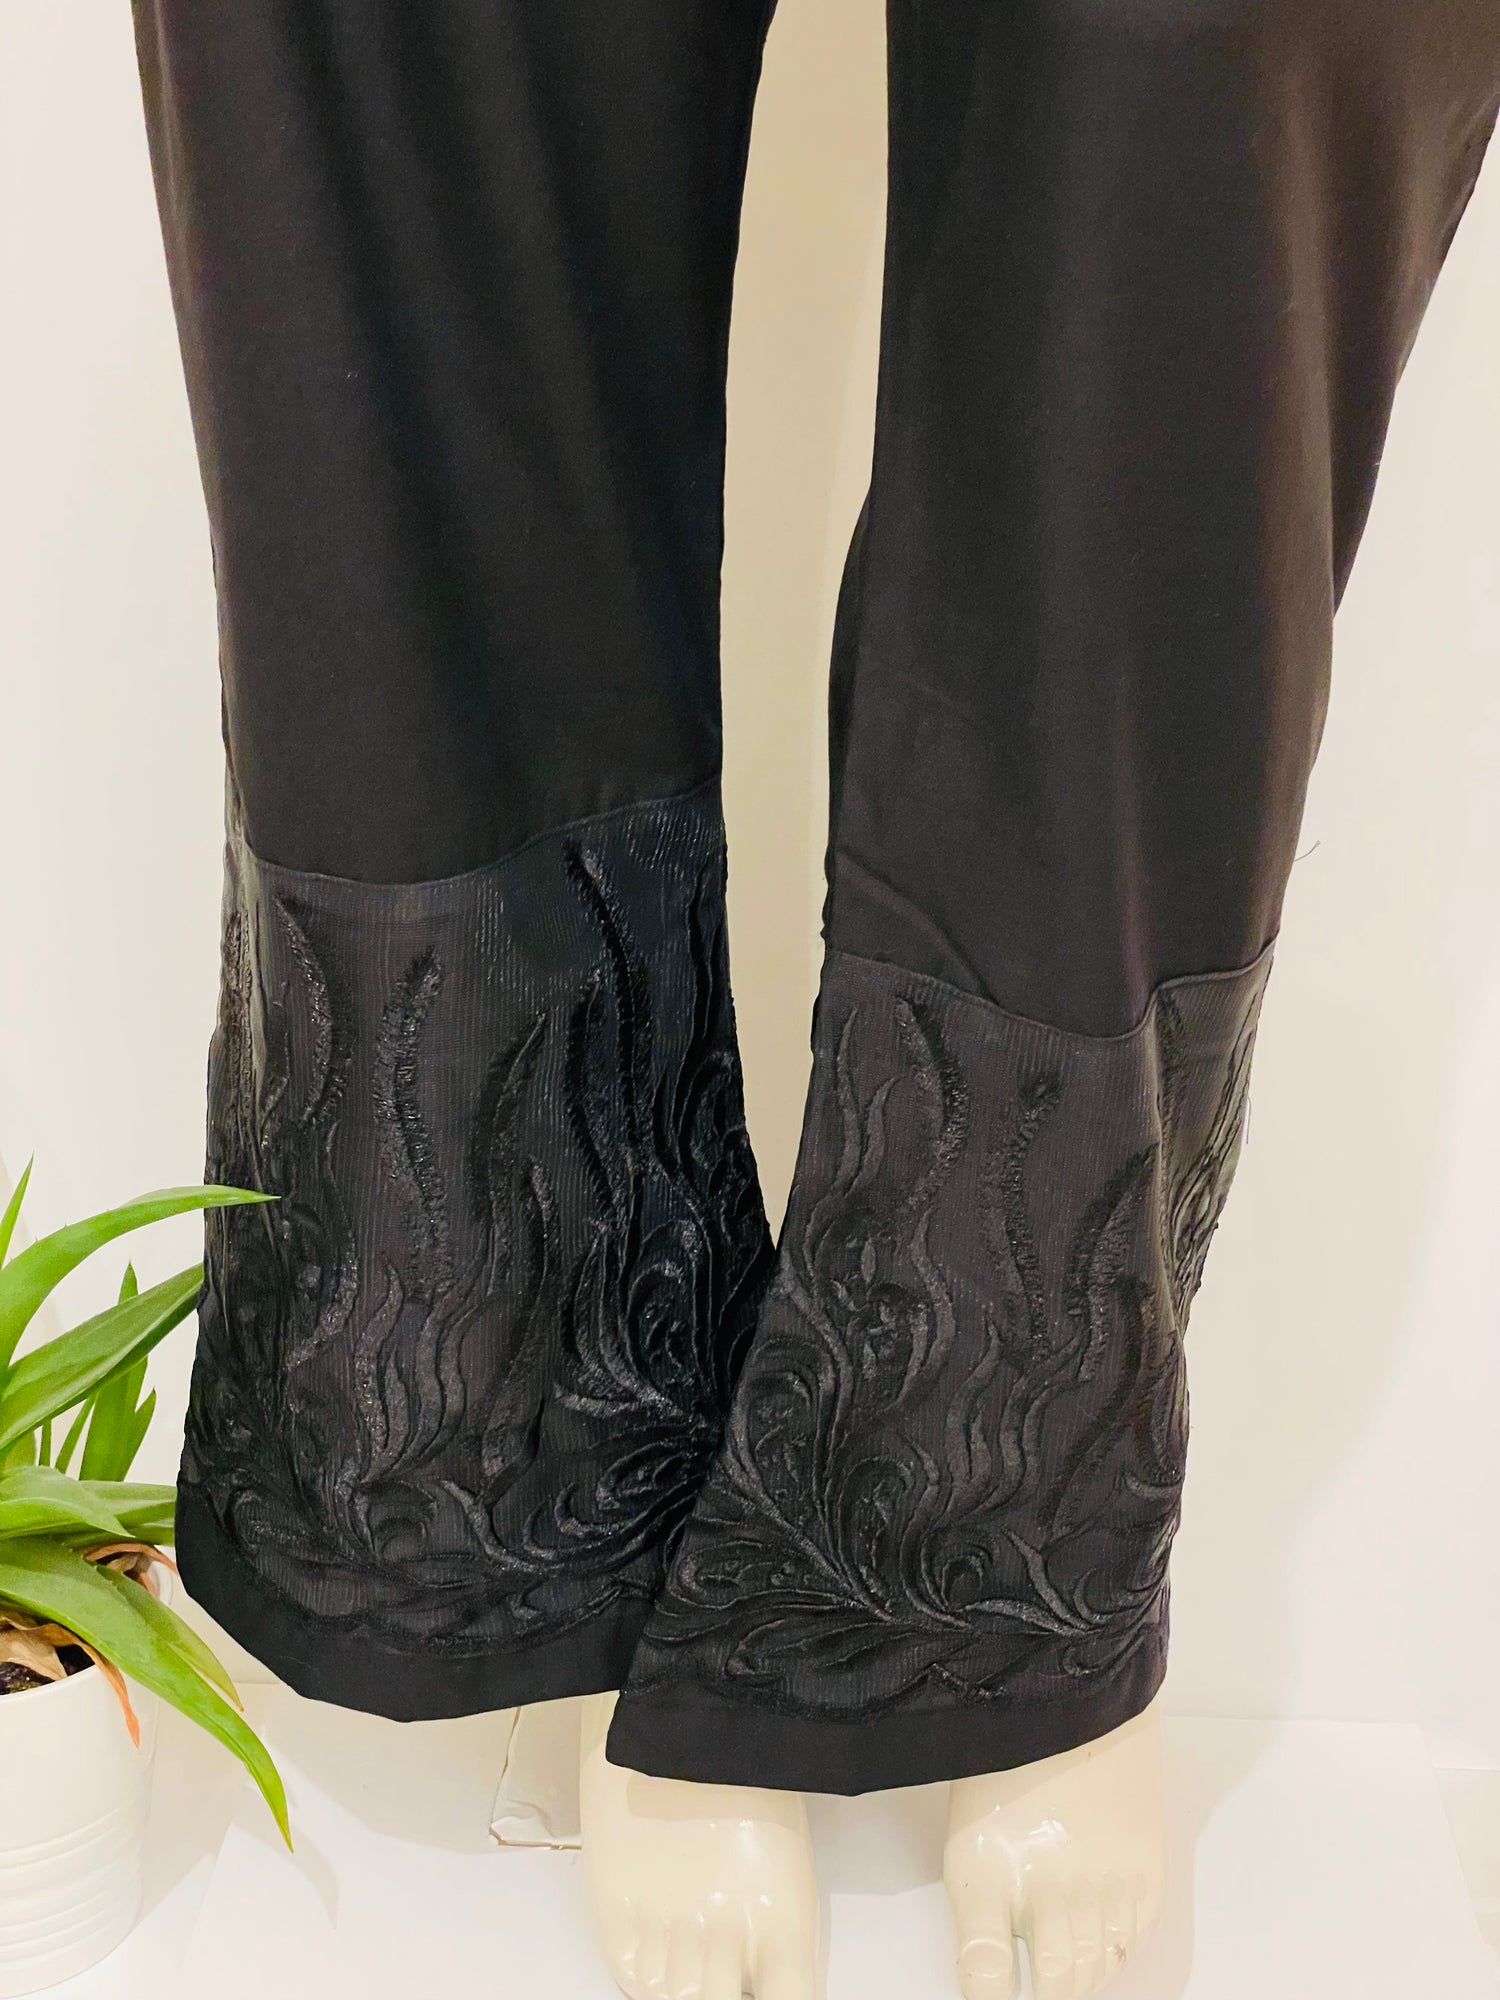 Trouser Design With Plates Trouser Design With Lace Trouser Design With  Button Trouser Design Wit | Women trousers design, Womens pants design,  Trouser designs